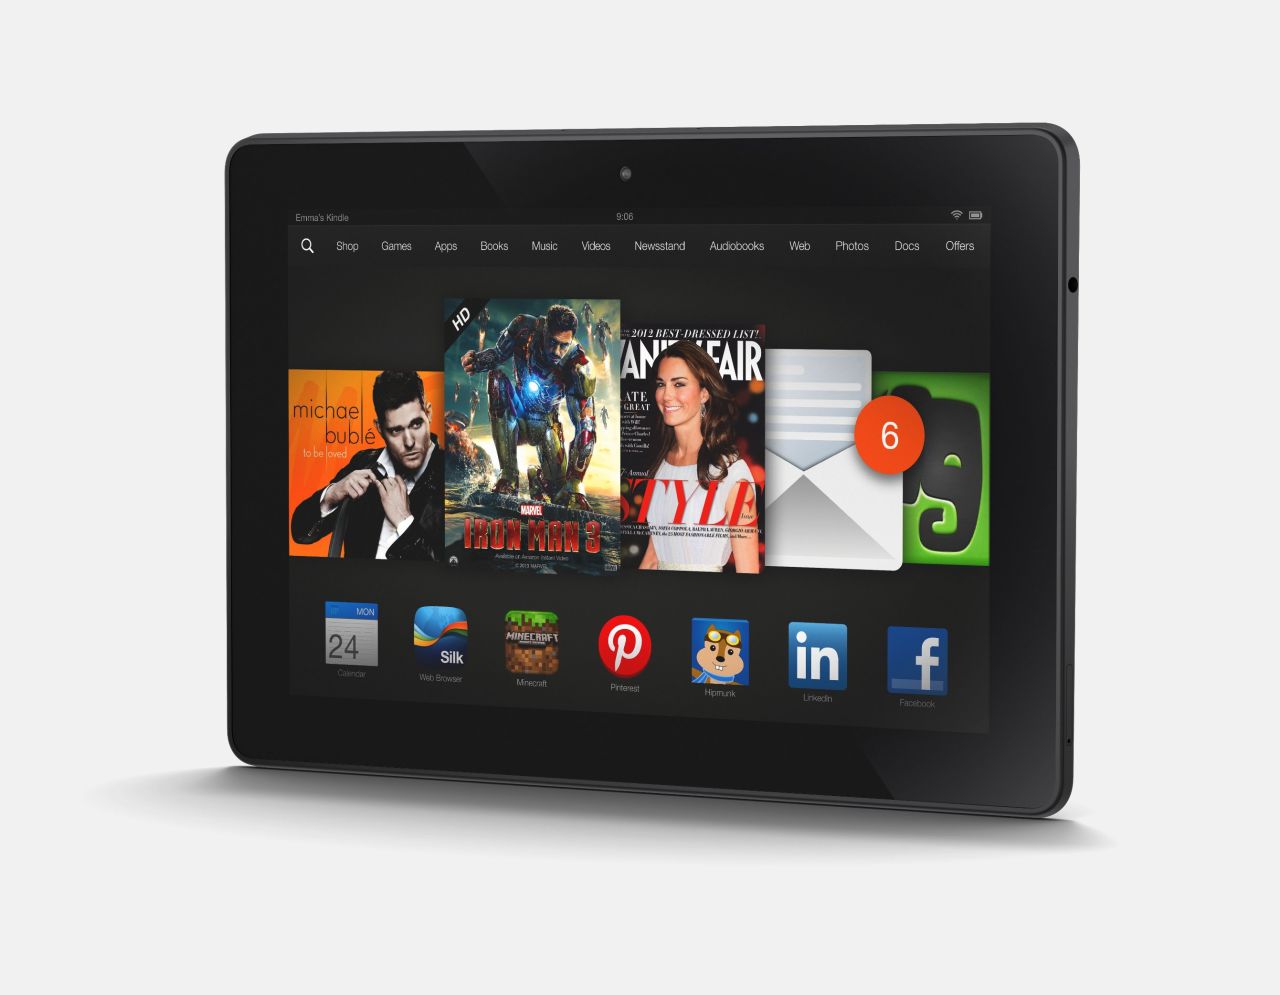 <strong>Kindle Fire HDX.</strong> OK, so the Kindle Fire HDX is a tablet and therefore familiar. But it comes with something unfamiliar: a <a href="http://www.cnn.com/2013/09/25/tech/mobile/kindle-customer-service/">human tech support representative</a> available at the touch of a button. This could be the tablet for your tech-unsavvy relatives. (Amazon.com, $229-309 depending on memory size)